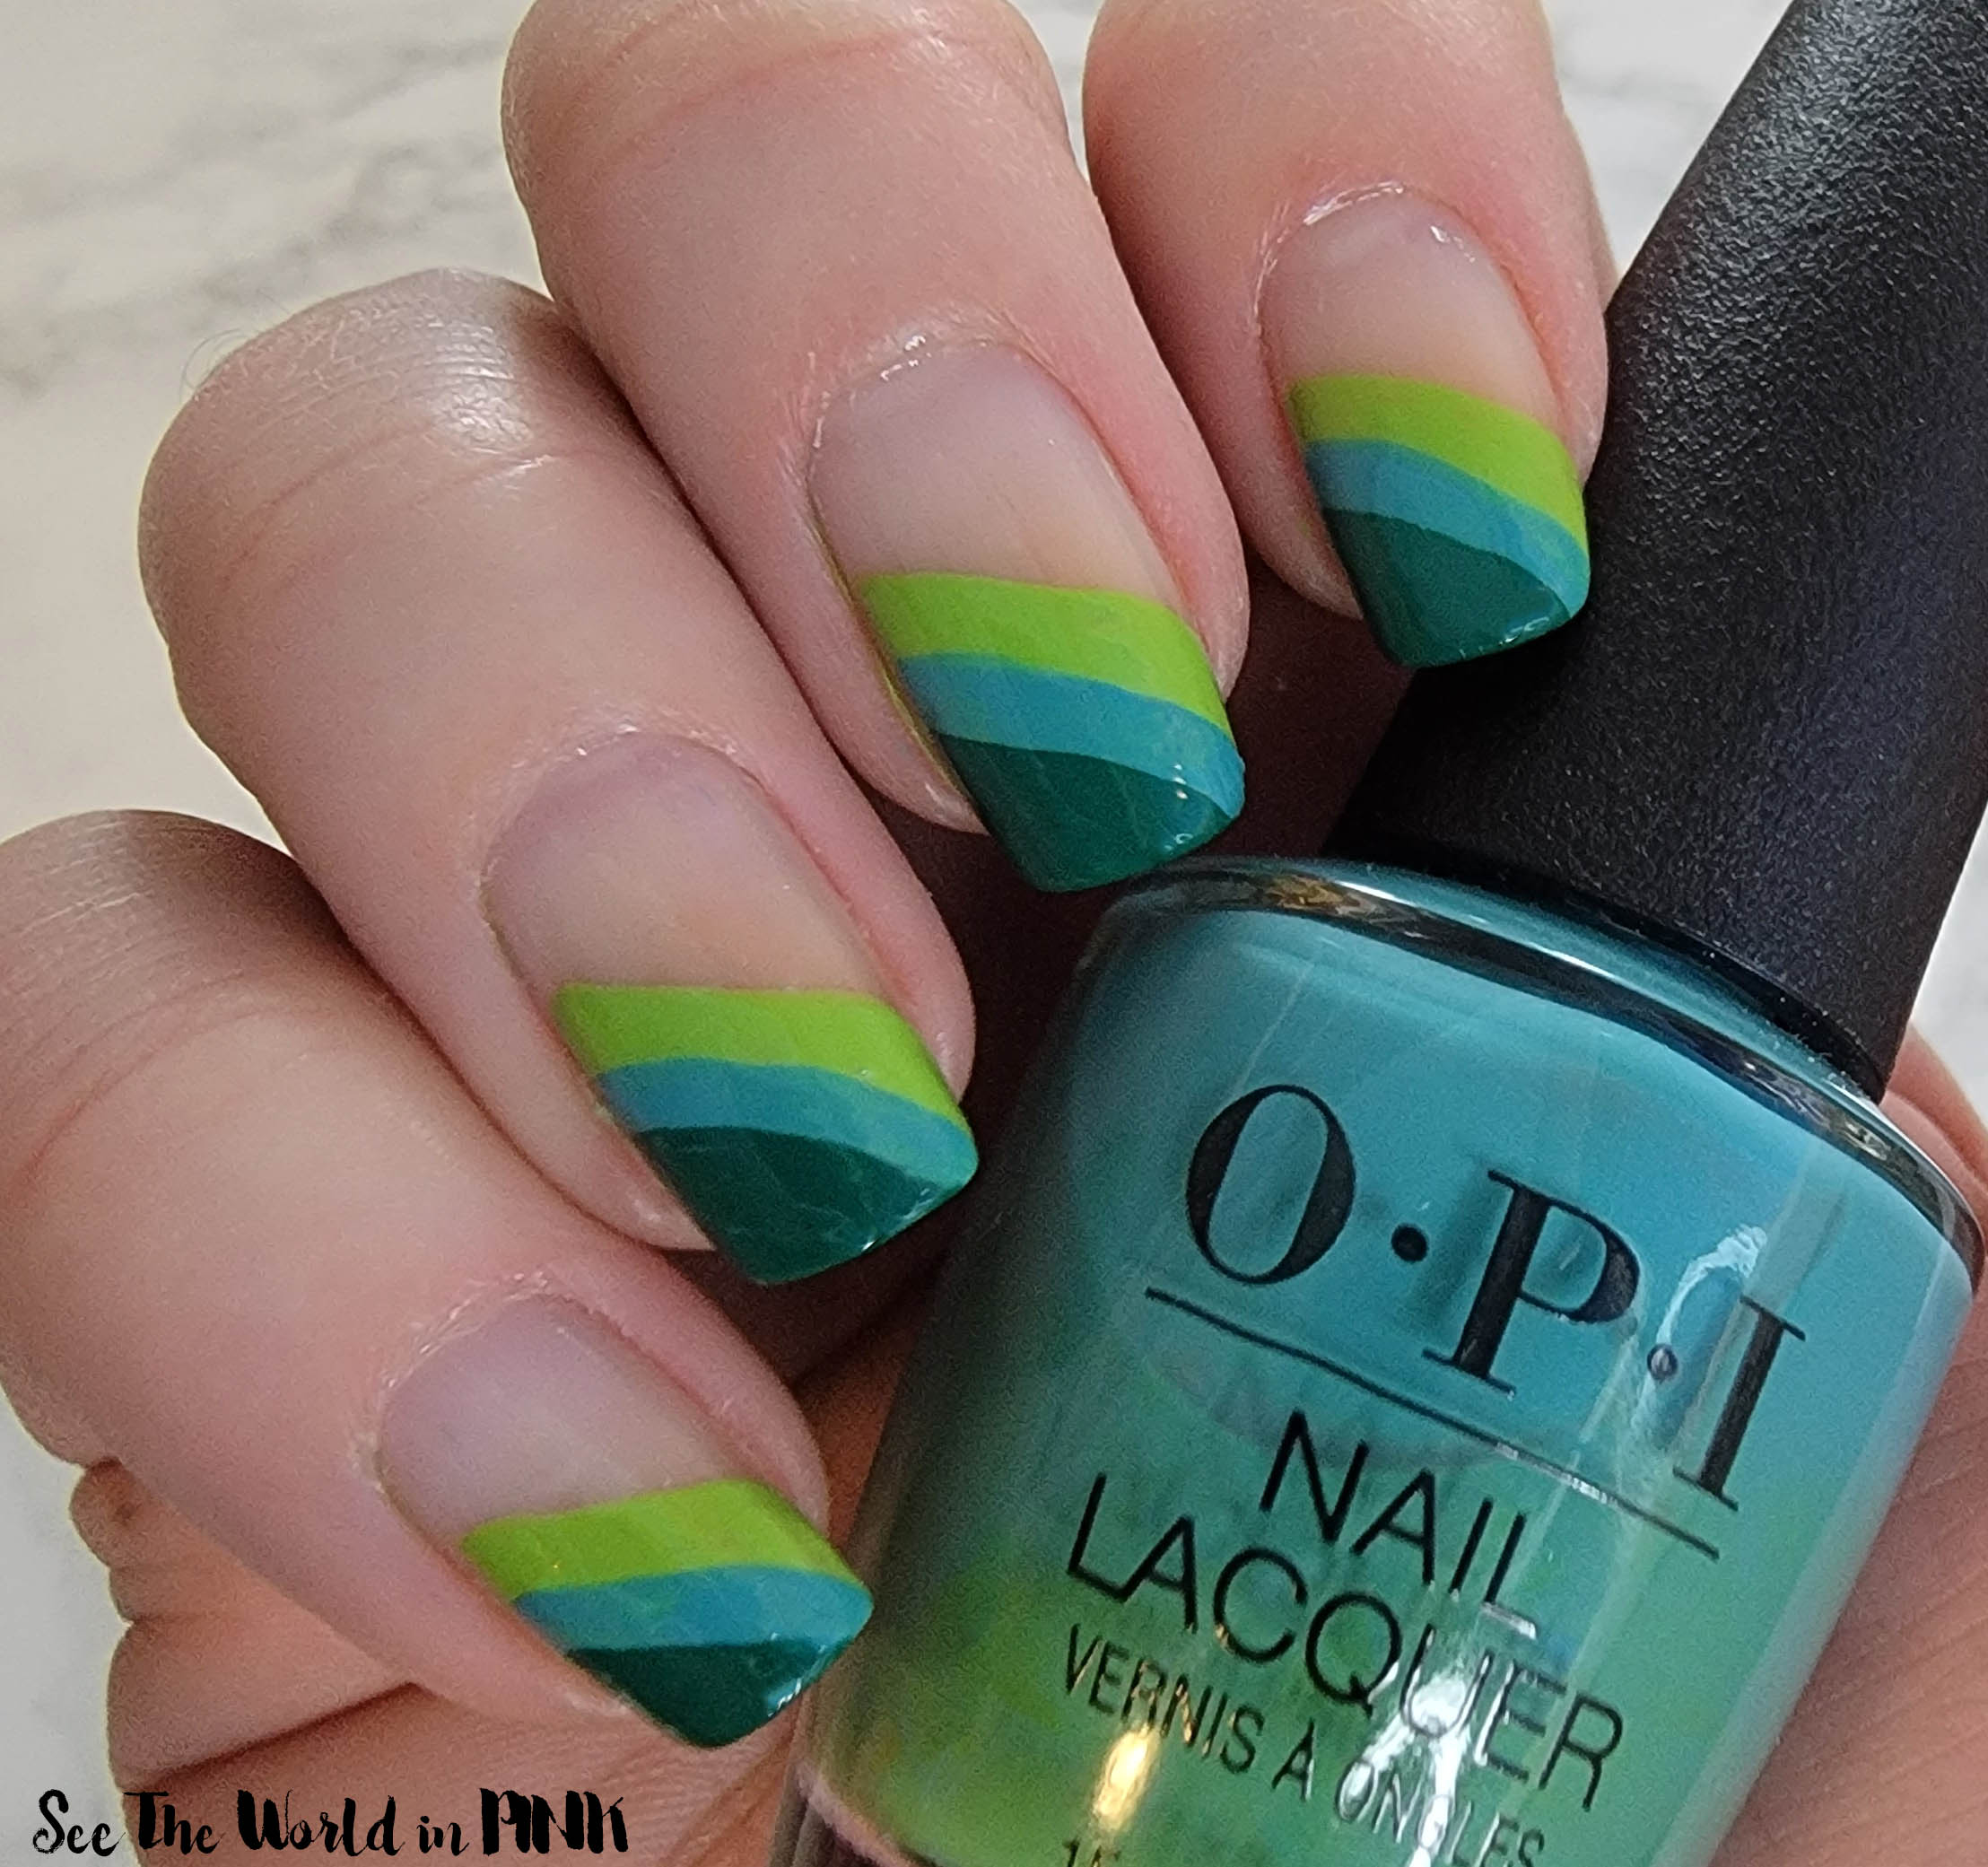 Manicure Monday - Green Striped Tips Nails